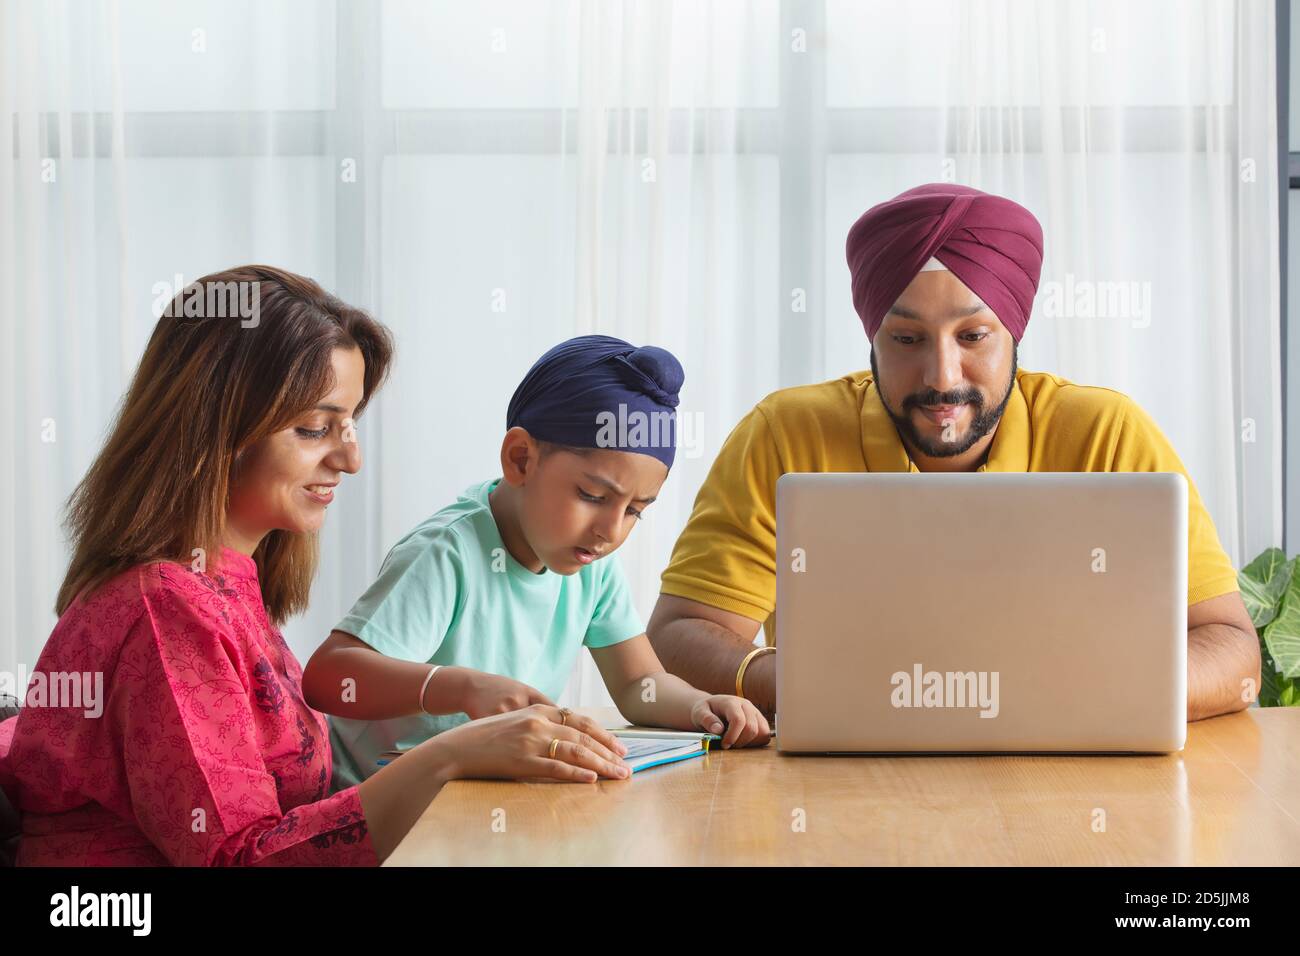 A SIKH BOY READING WITH MOTHER WHILE FATHER IS WORKING ON HIS LAPTOP Stock Photo